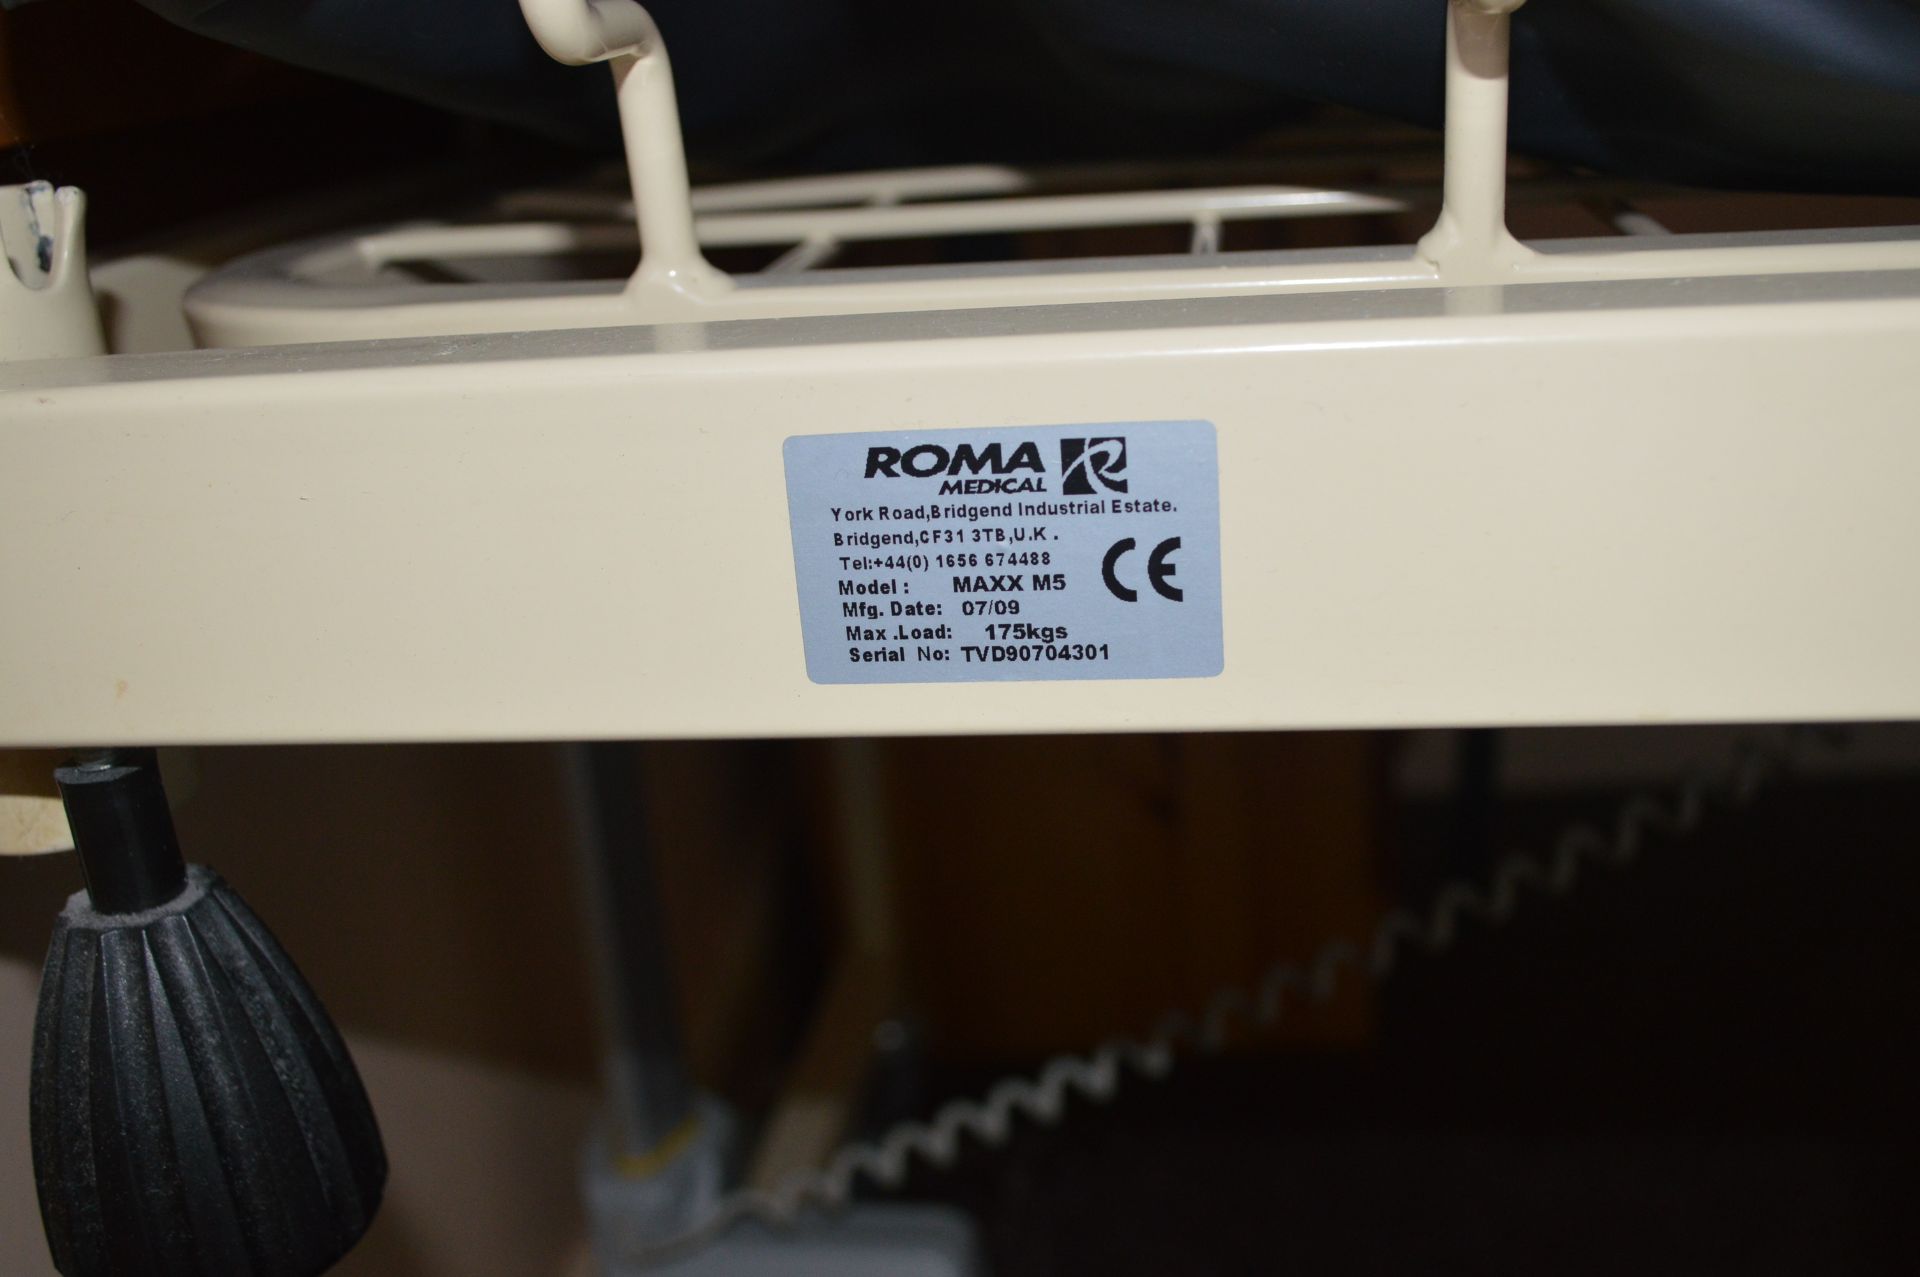 Roma Medical Model MAXX M5, Homecare Electric Adjustable bed, Max Lod 175Kg, (07/09) - Image 2 of 11